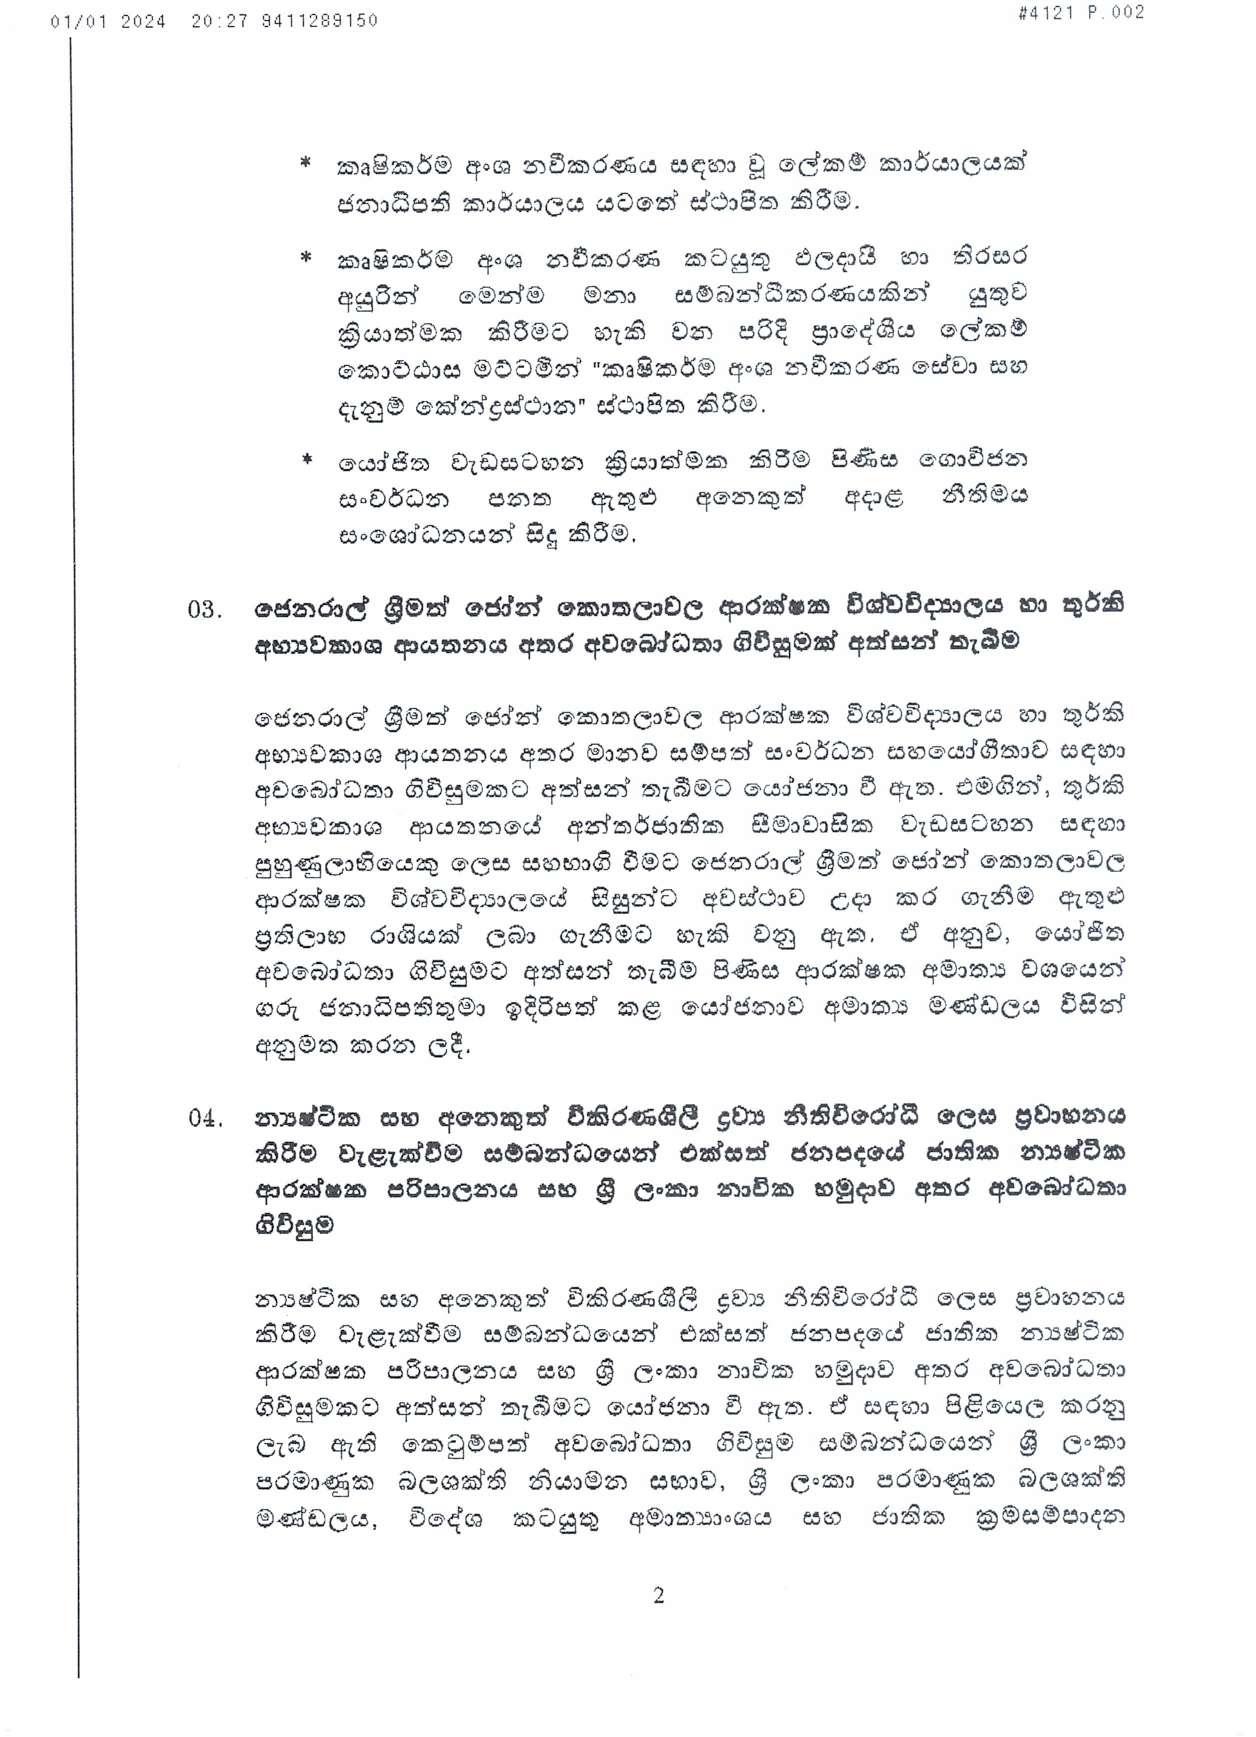 Cabinet Decision on 01.01.2024 page 002